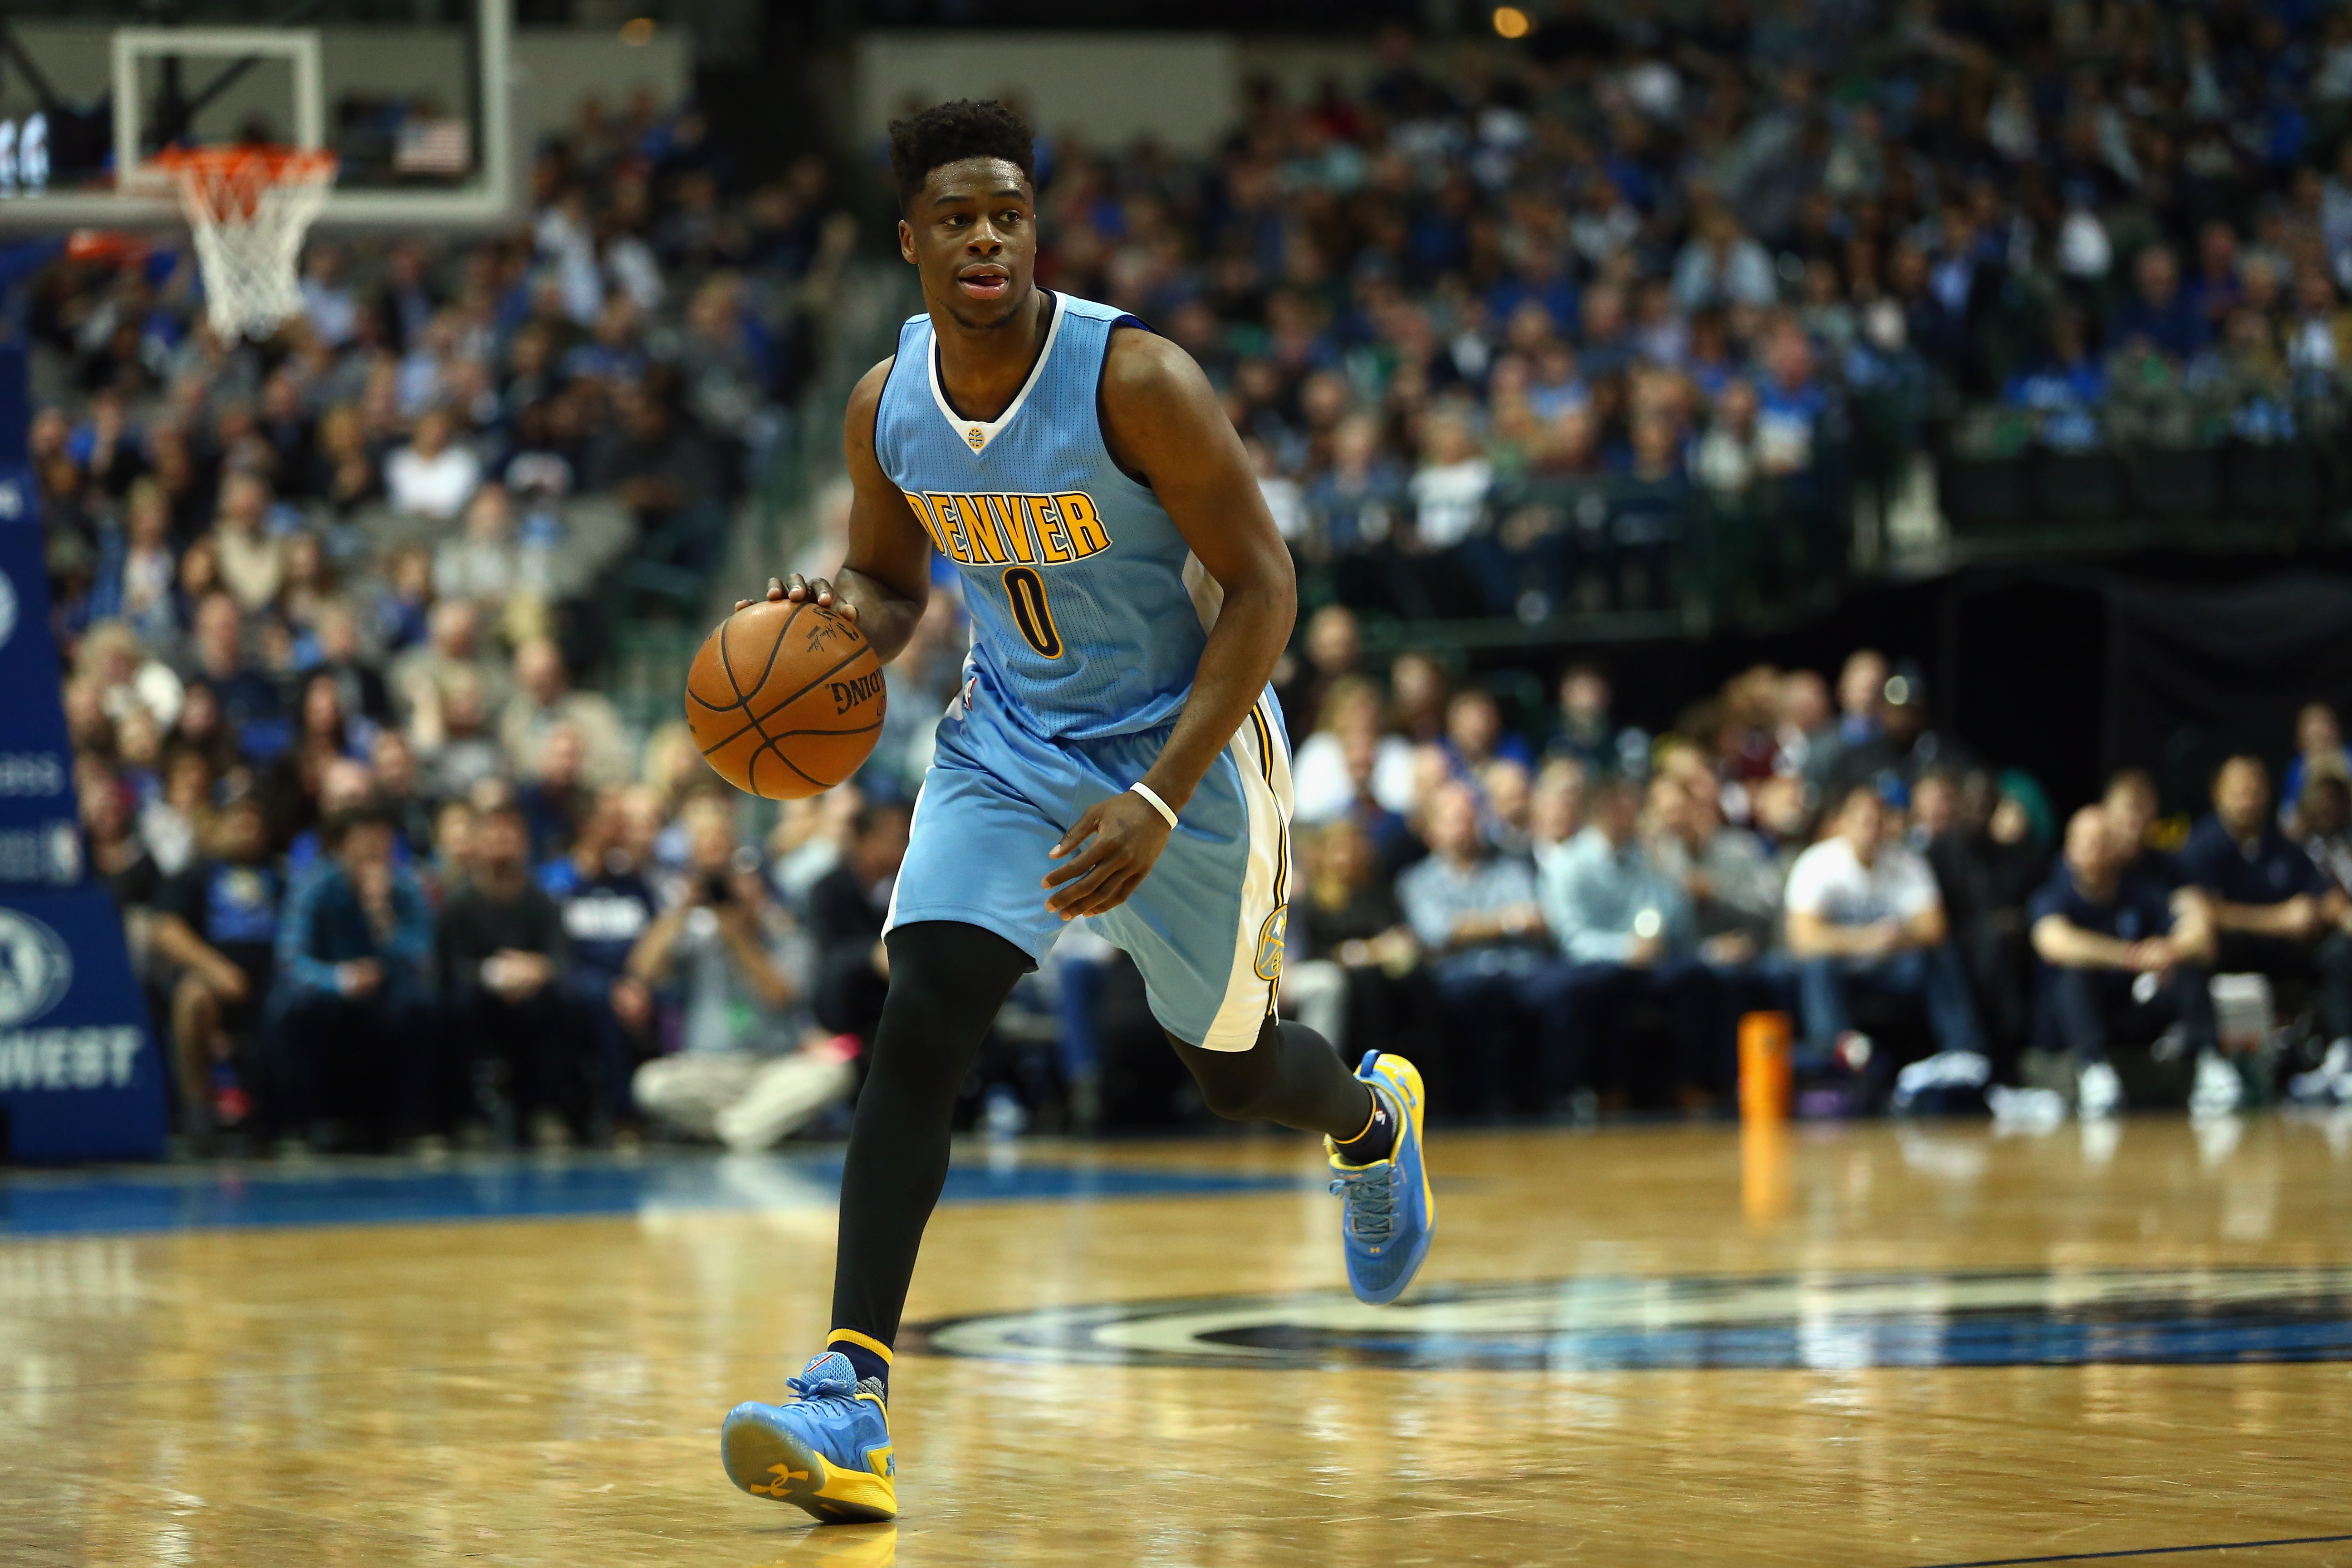 DALLAS, TX - FEBRUARY 26: Emmanuel Mudiay #0 of the Denver Nuggets during the first half at American Airlines Center on February 26, 2016 in Dallas, Texas. NOTE TO USER: User expressly acknowledges and agrees that, by downloading and or using this photograph, User is consenting to the terms and conditions of the Getty Images License Agreement.   Ronald Martinez/Getty Images/AFP